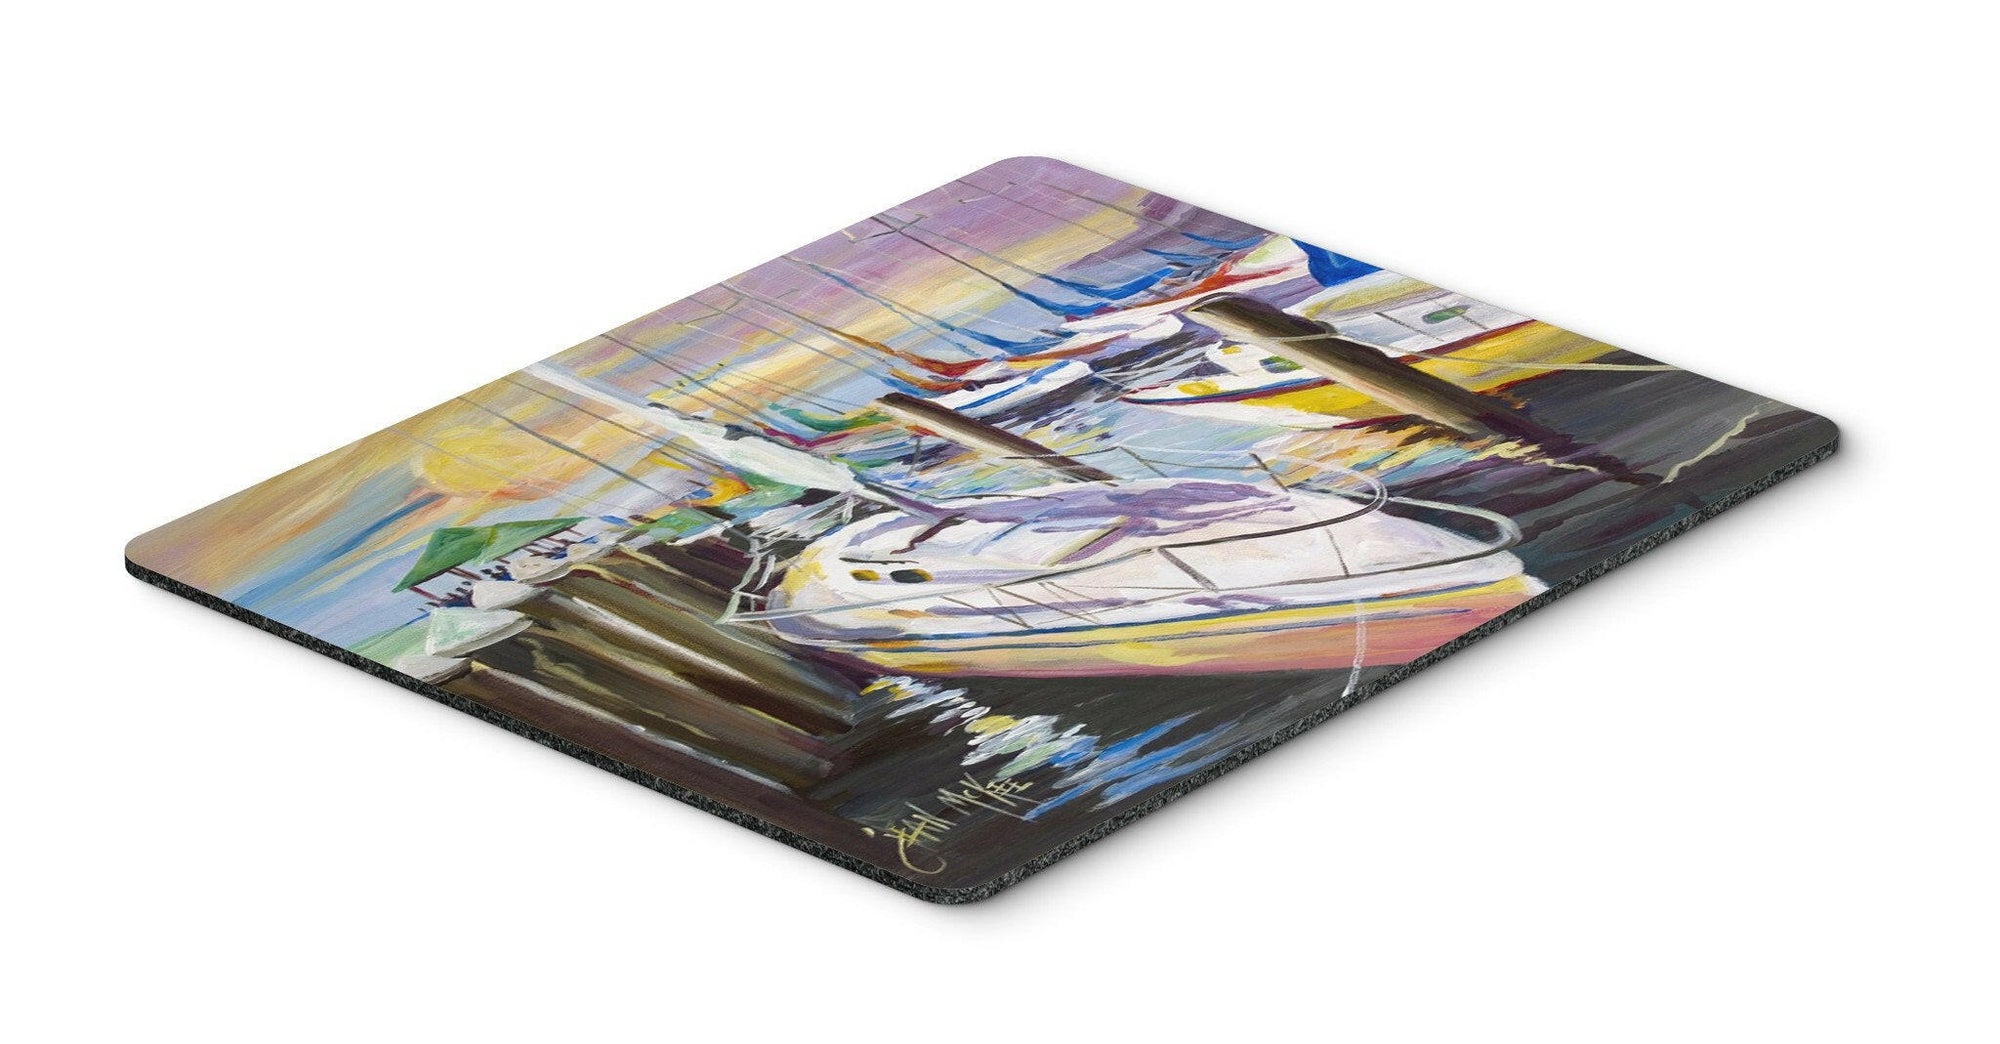 Sailboats at the Fairhope Yacht Club Docks Mouse Pad, Hot Pad or Trivet by Caroline's Treasures